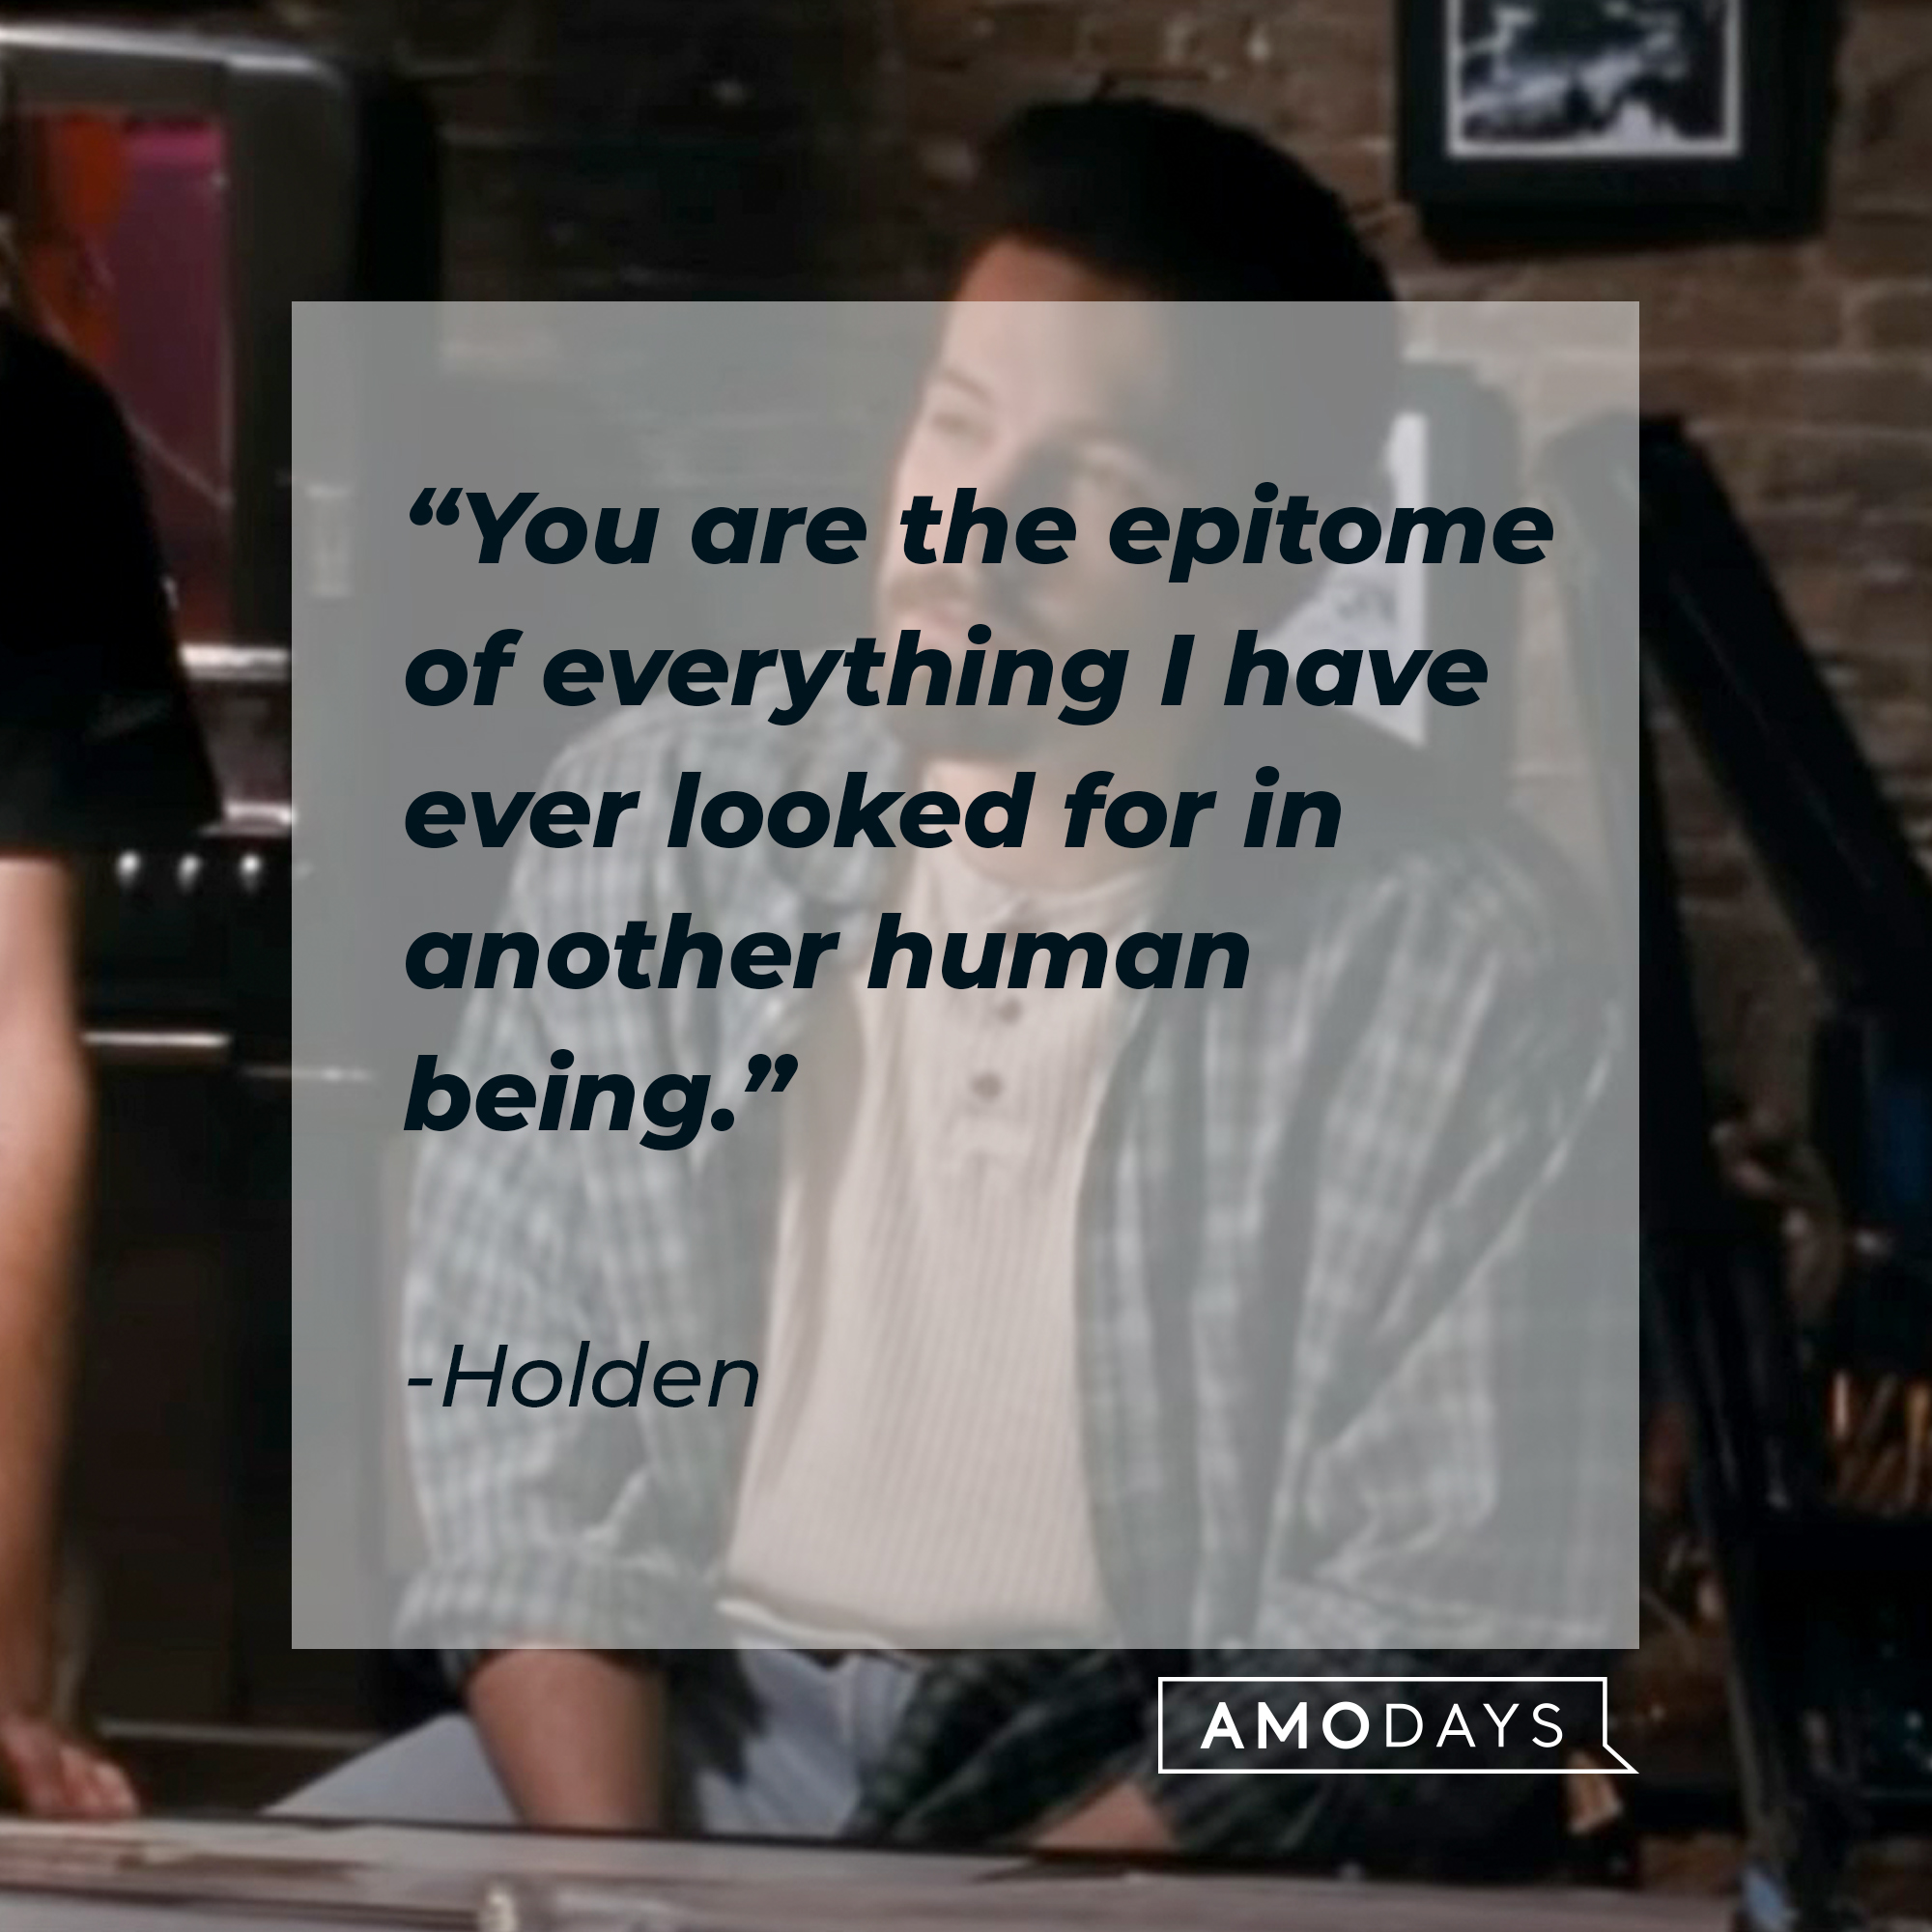 Holden, with his quote: "You are the epitome of everything I have ever looked for in another human being.” | Source: facebook.com/ChasingAmyMovie